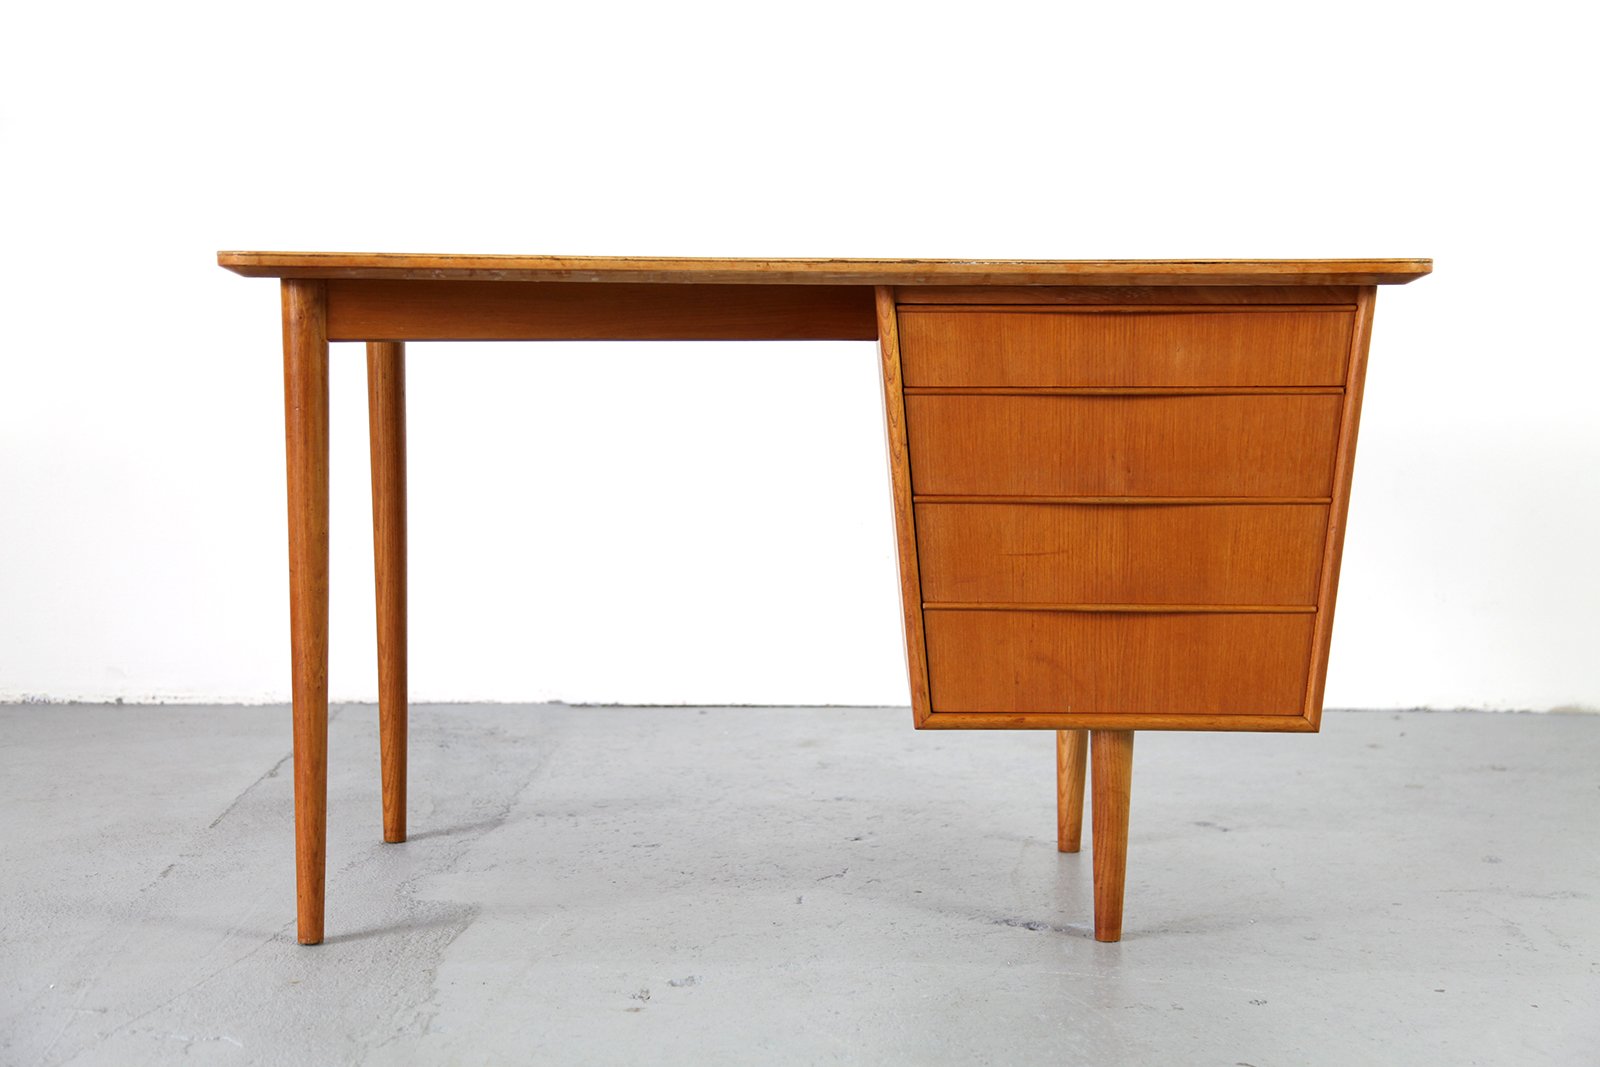 Small Mid-Century Modern Desk, 1950s for sale at Pamono